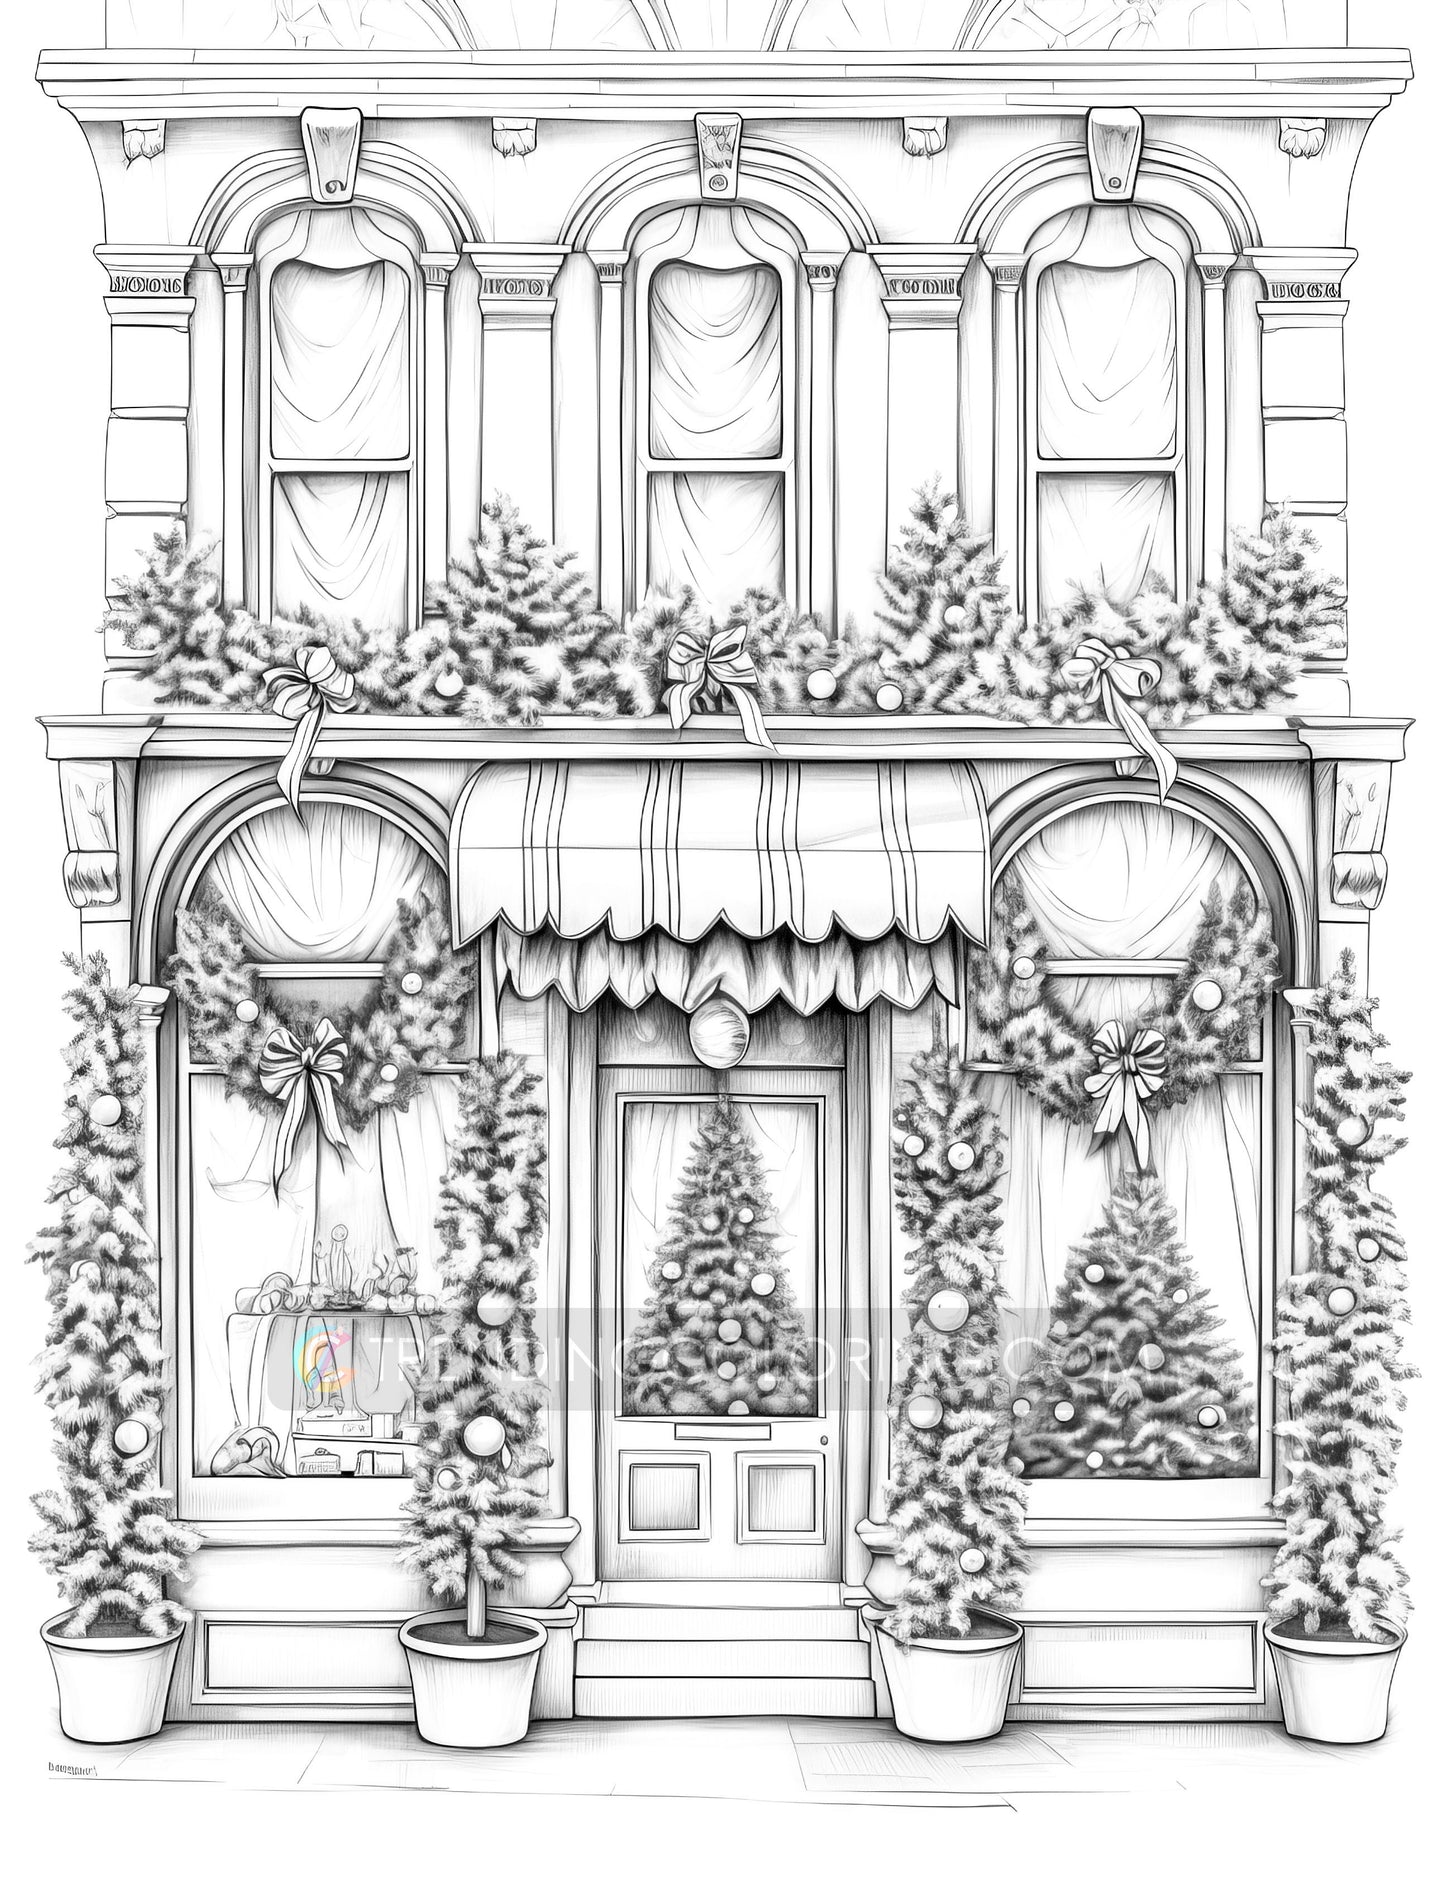 50 Christmas Storefront Grayscale Coloring Pages - Instant Download - Printable PDF Dark/Light